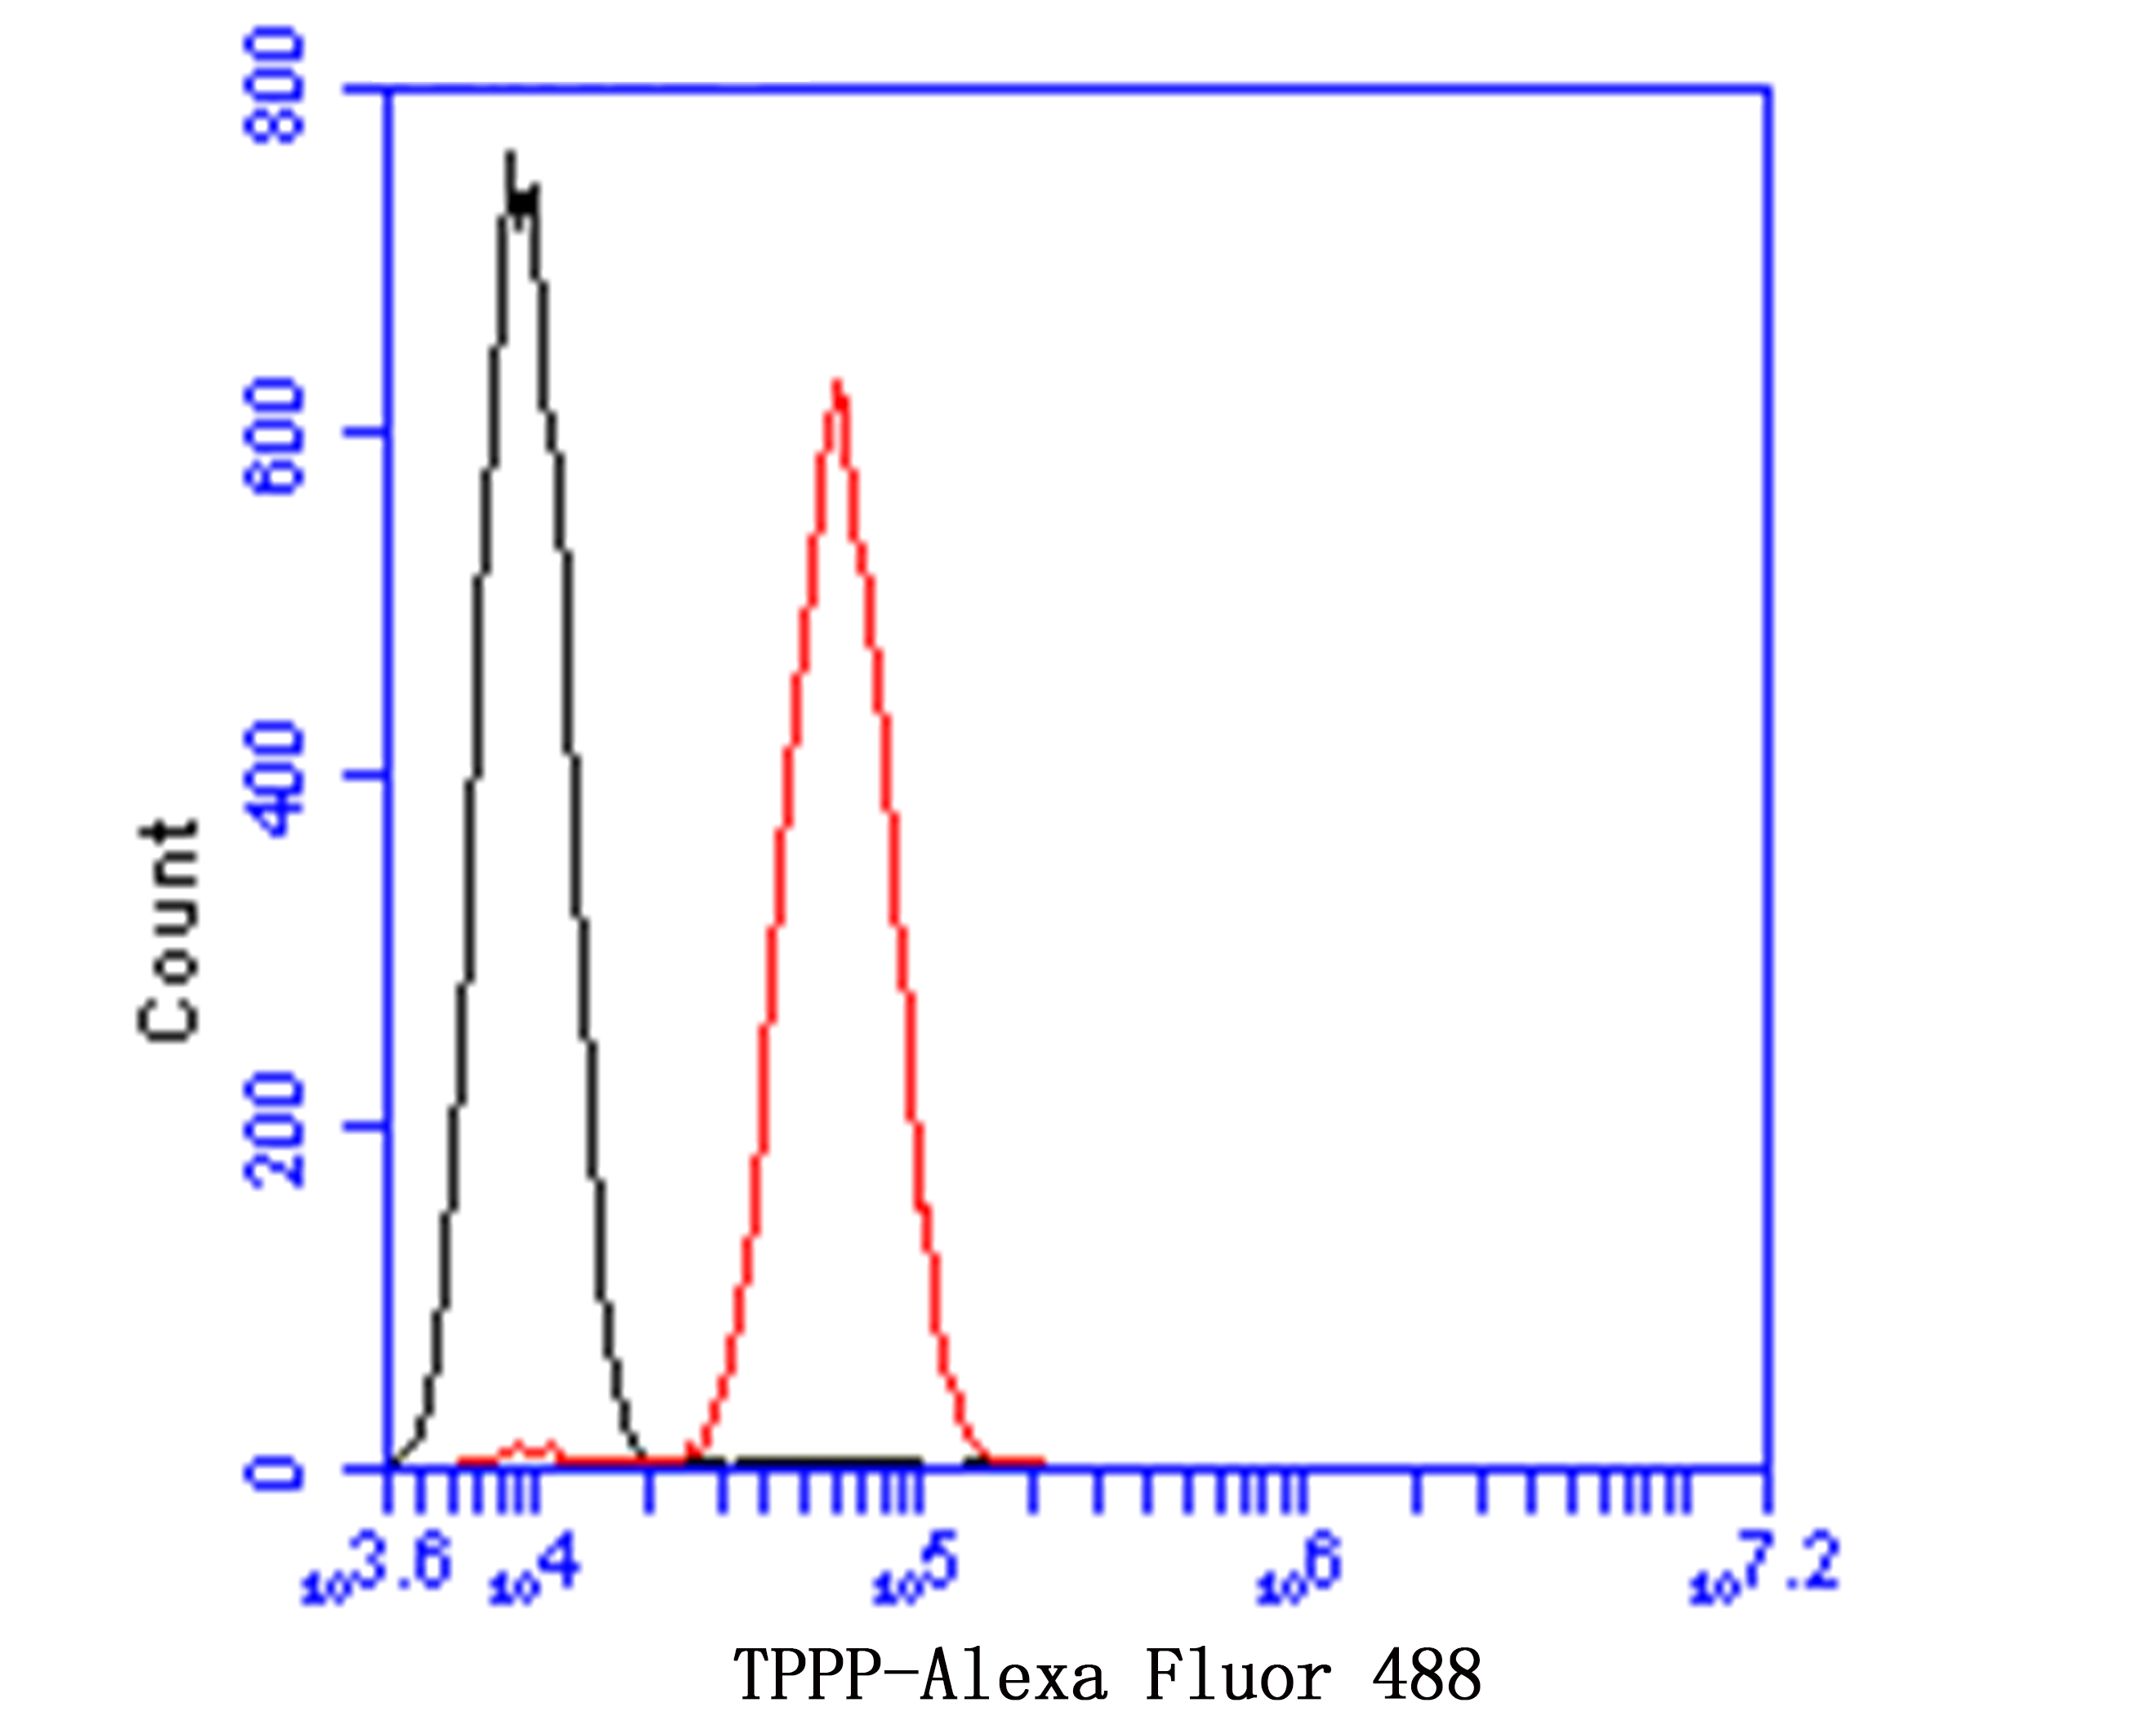 Flow cytometric analysis of TPPP was done on SHG-44 cells. The cells were fixed, permeabilized and stained with the primary antibody (ET7109-56, 1/100) (red). After incubation of the primary antibody at room temperature for an hour, the cells were stained with a Alexa Fluor 488-conjugated goat anti-rabbit IgG Secondary antibody at 1/500 dilution for 30 minutes. Unlabelled sample was used as a control (cells without incubation with primary antibody; blue).